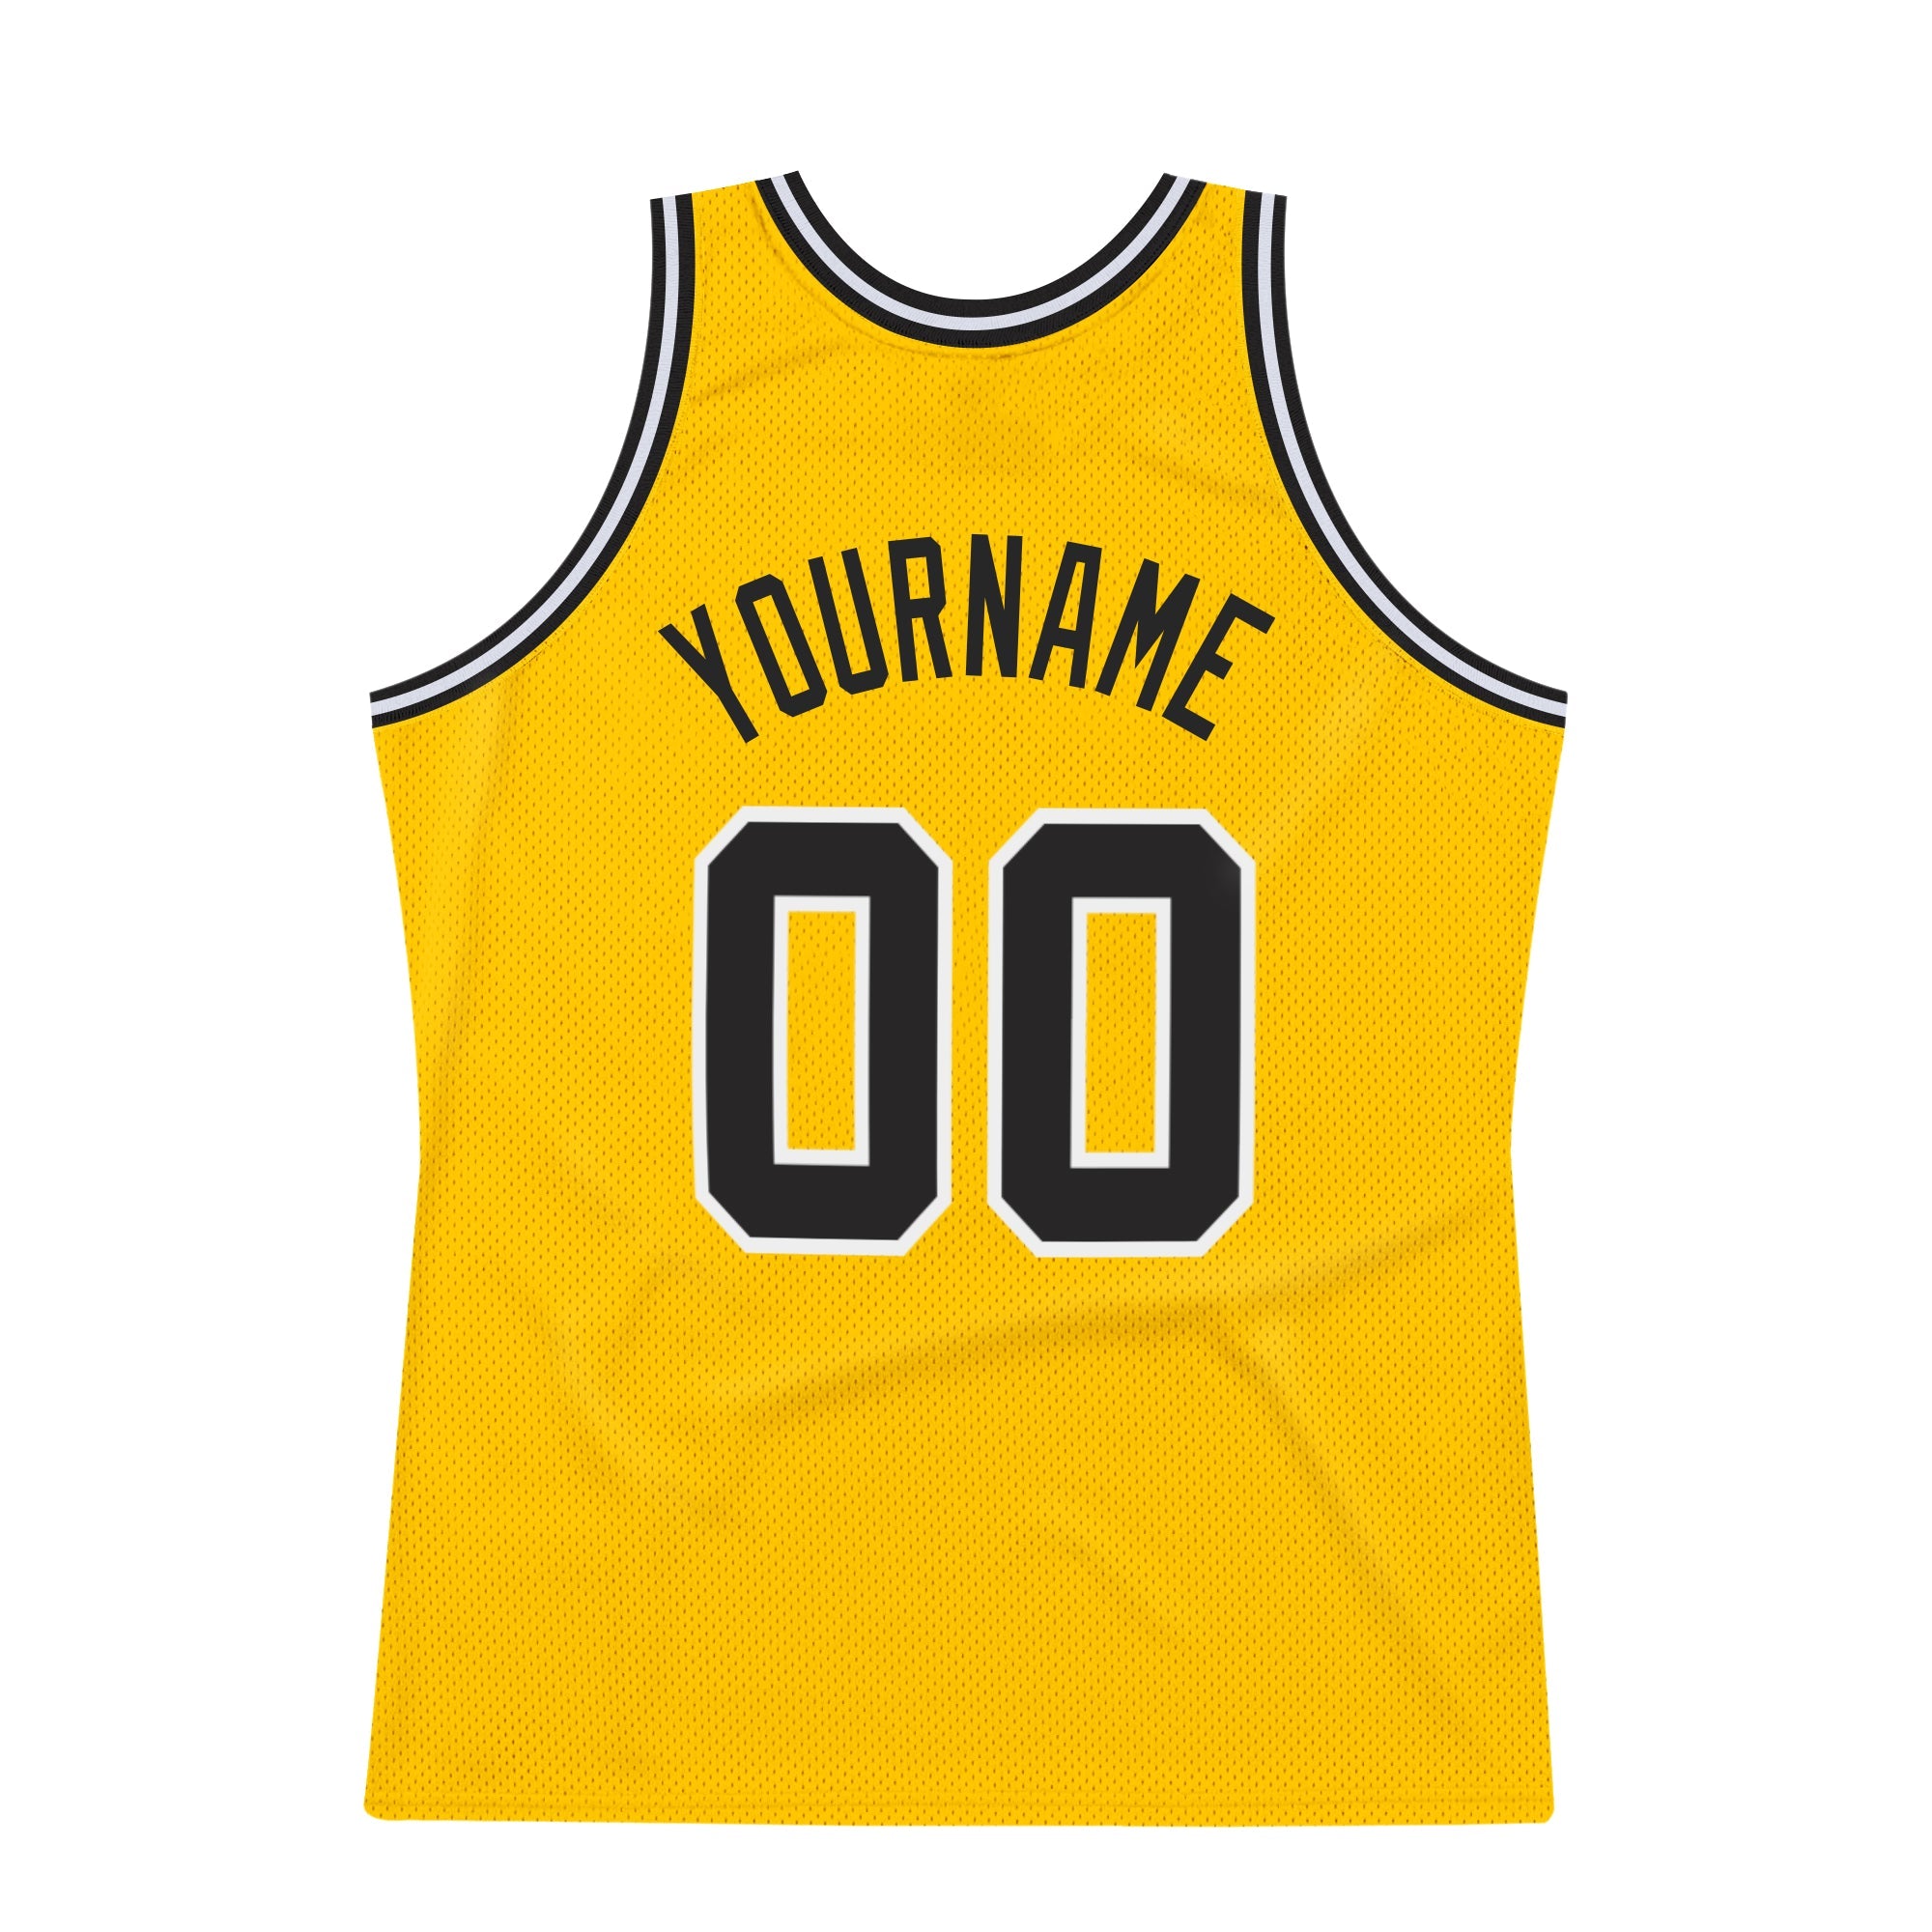 Custom White Purple-Gold Authentic Throwback Basketball Jersey